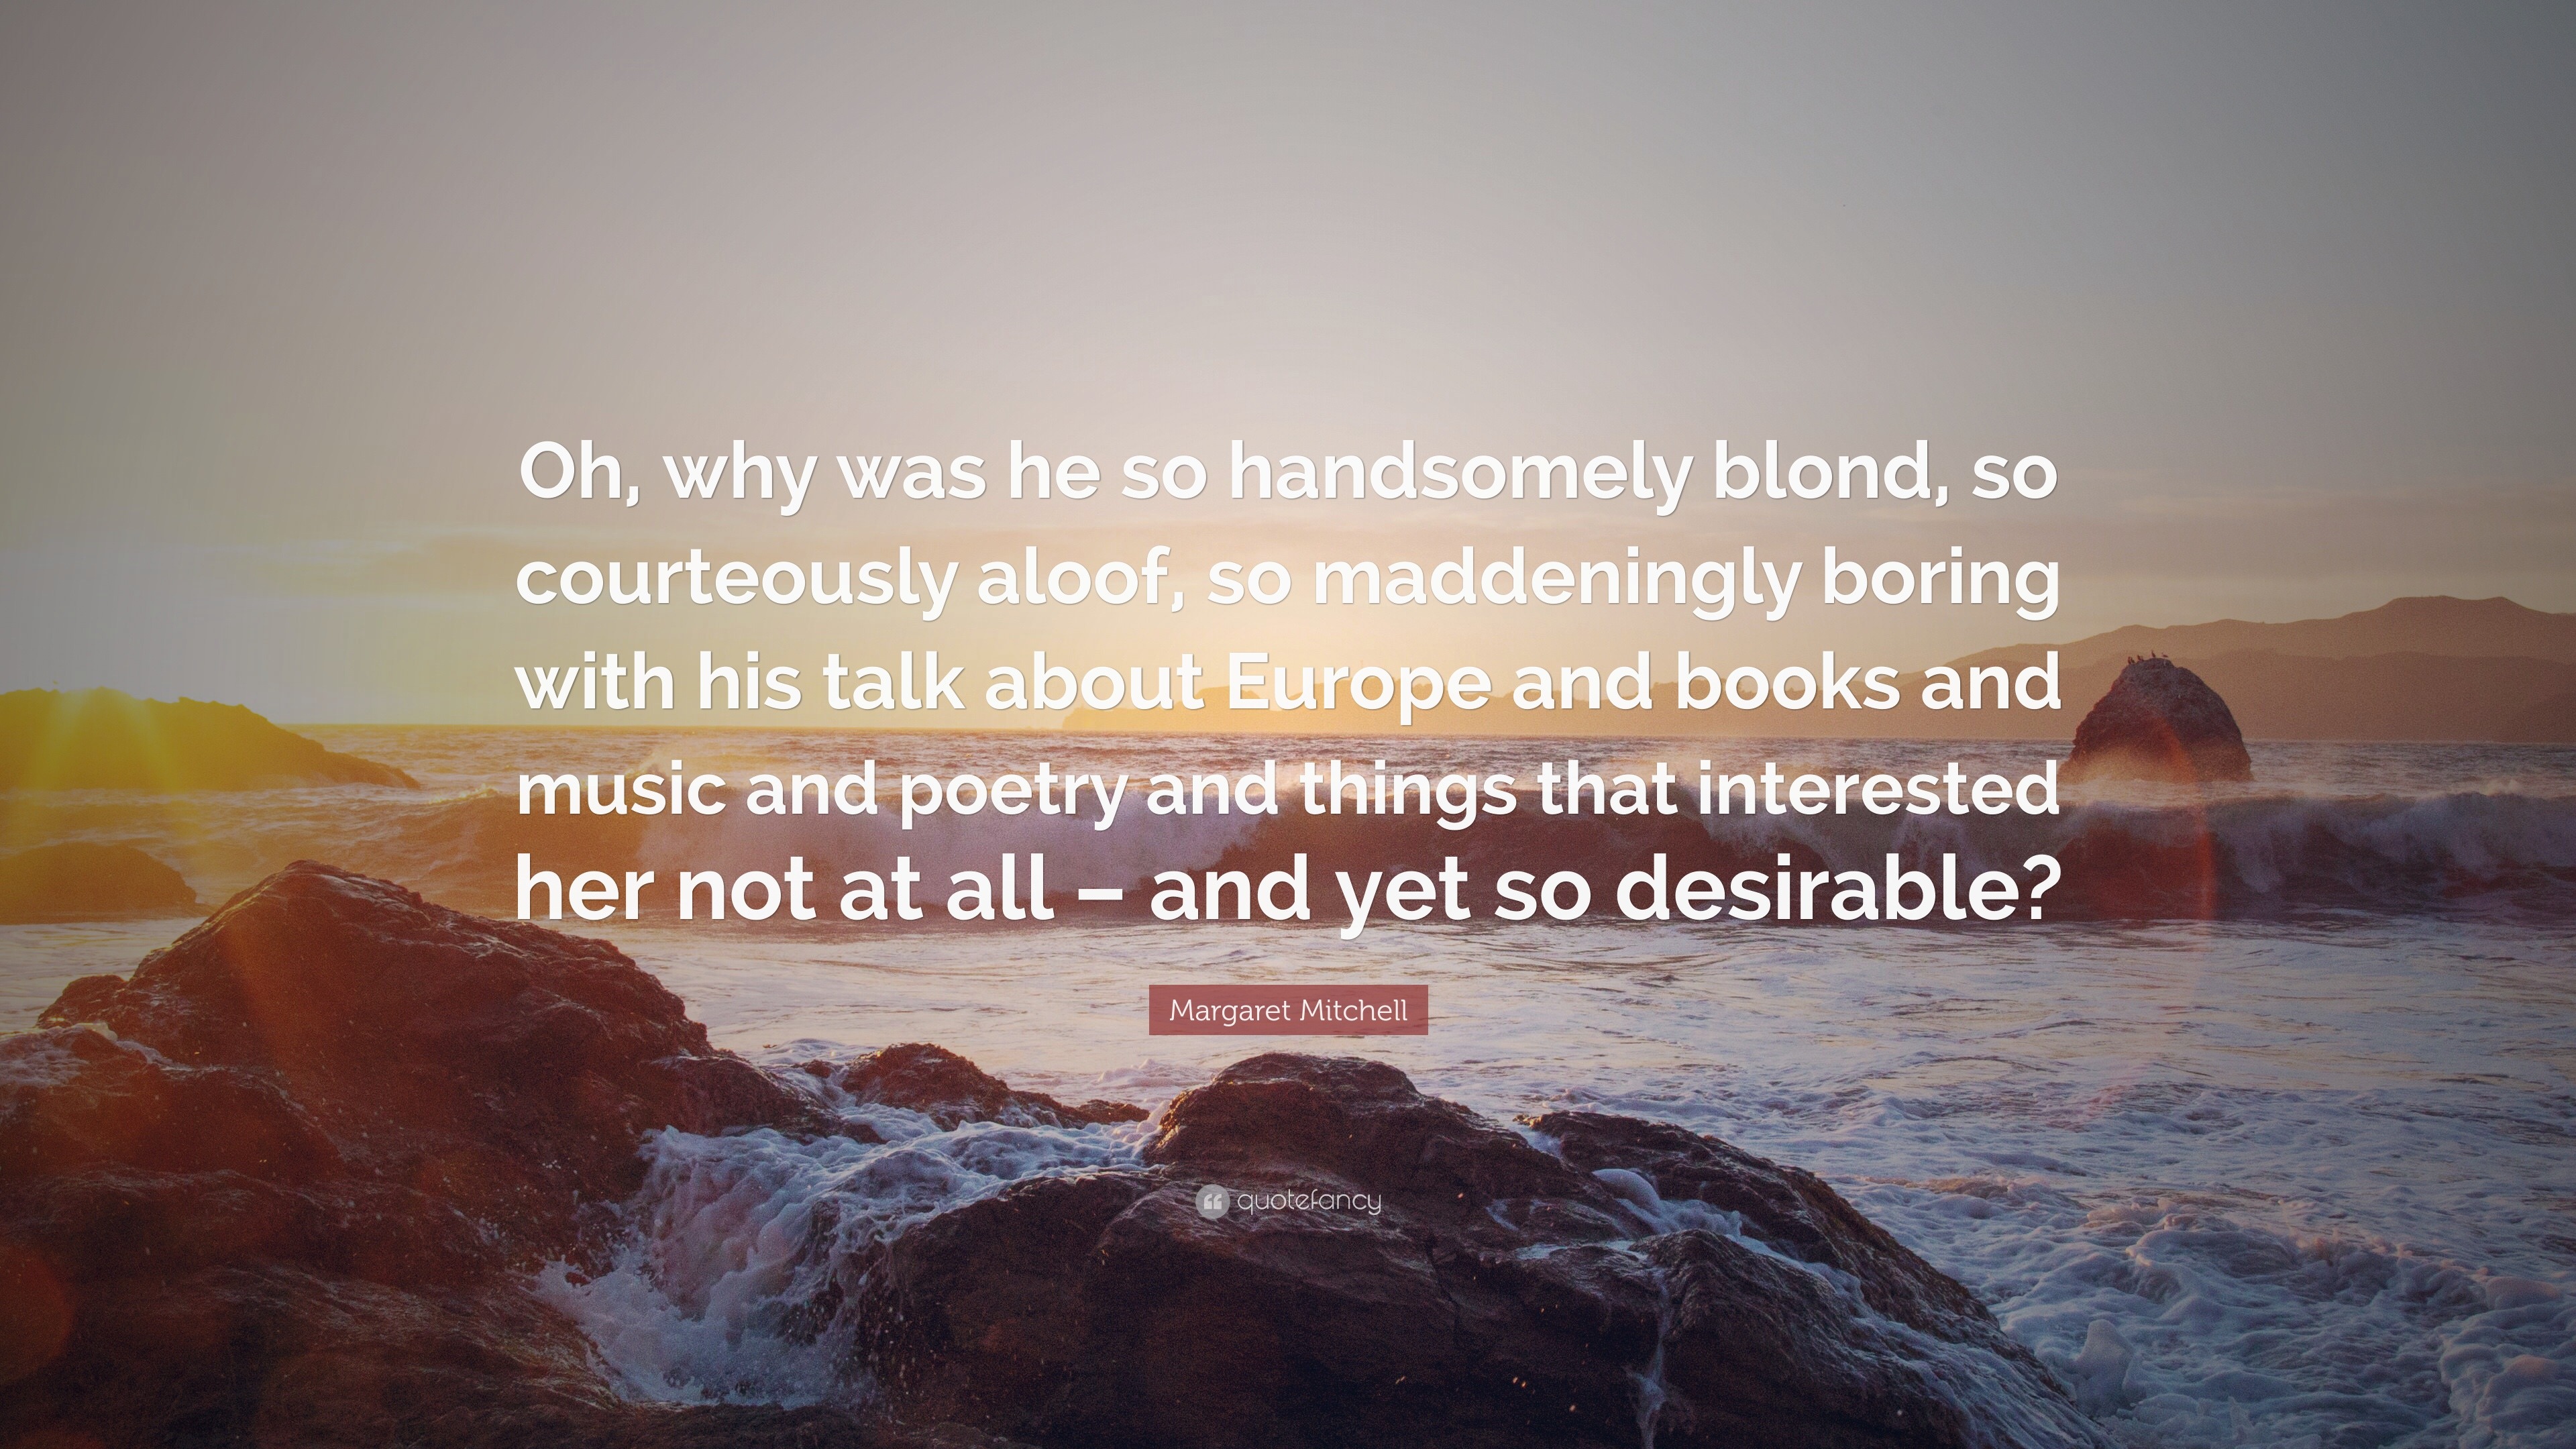 Margaret Mitchell Quote: “Oh, why was he so handsomely blond, so ...